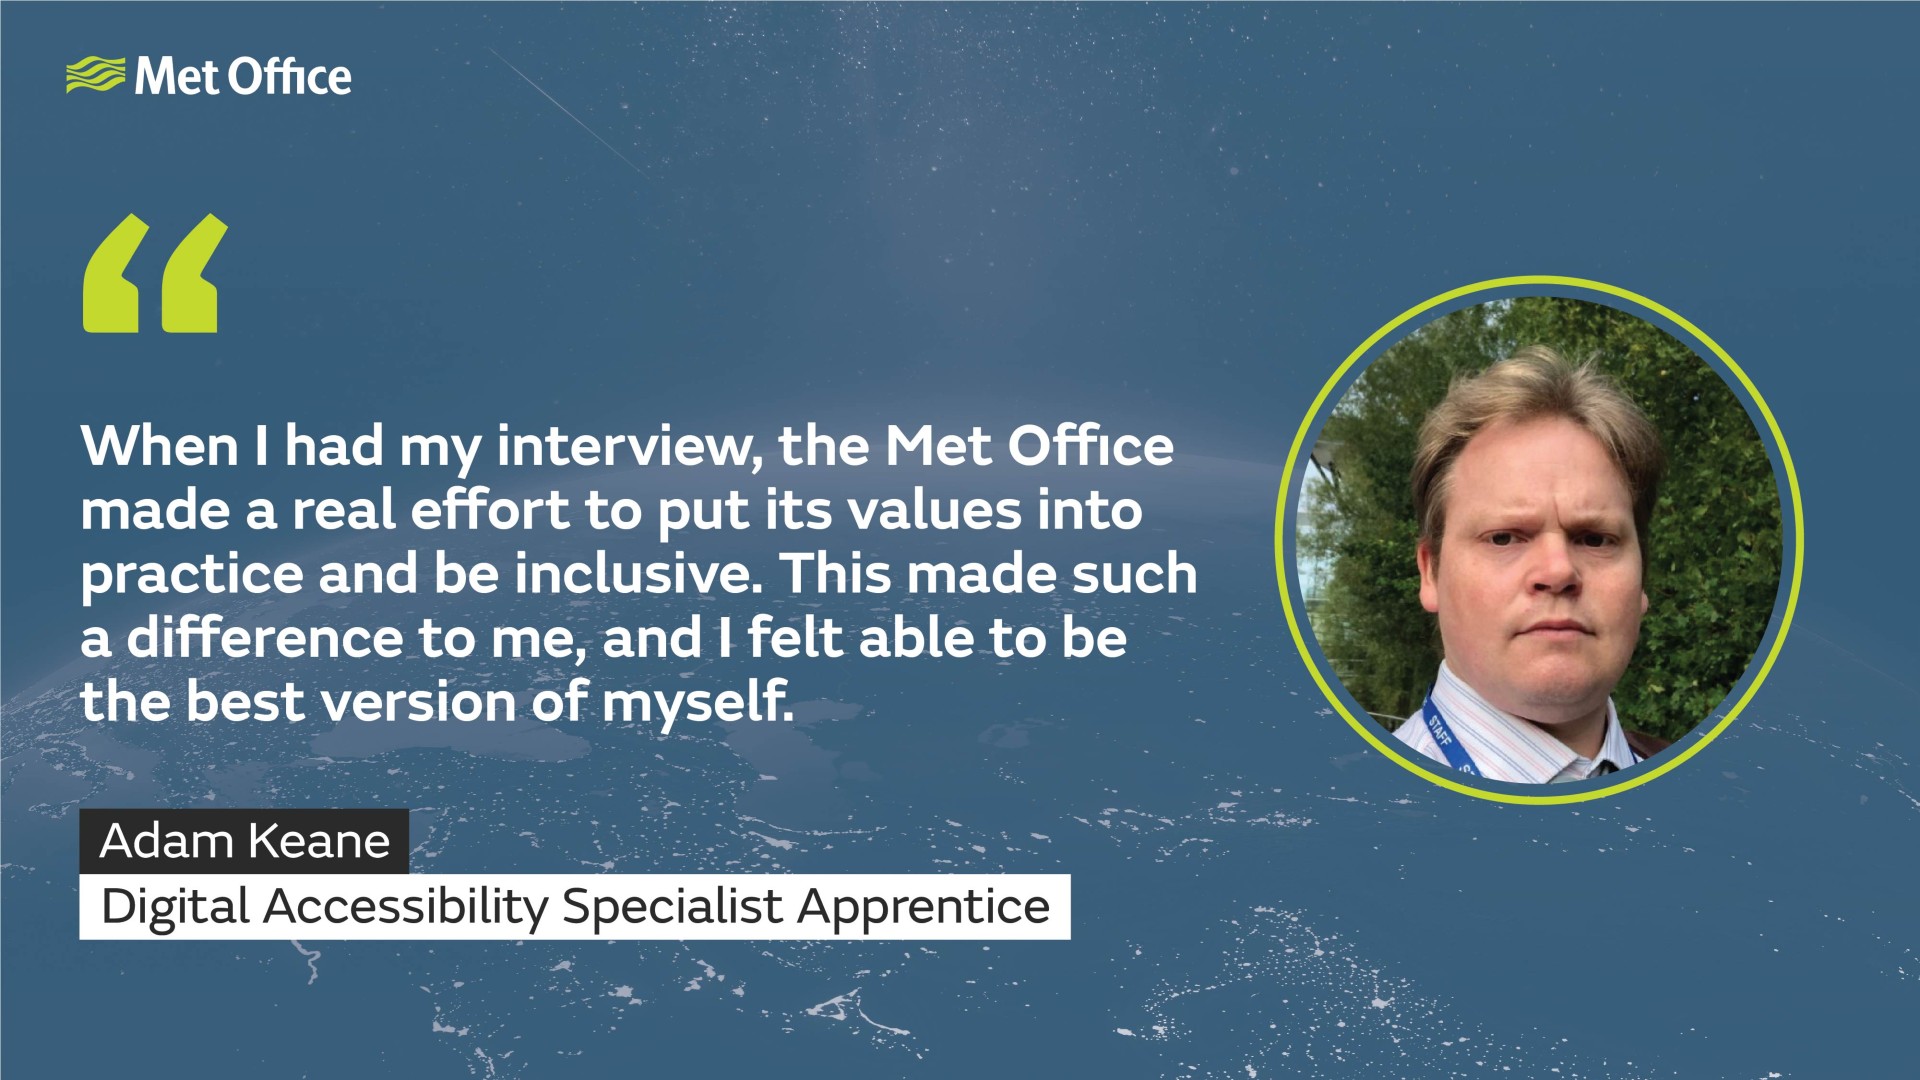 This is a quote graphic about Adam Keane Digital Accessibility Specialist Apprentice at the Met Office